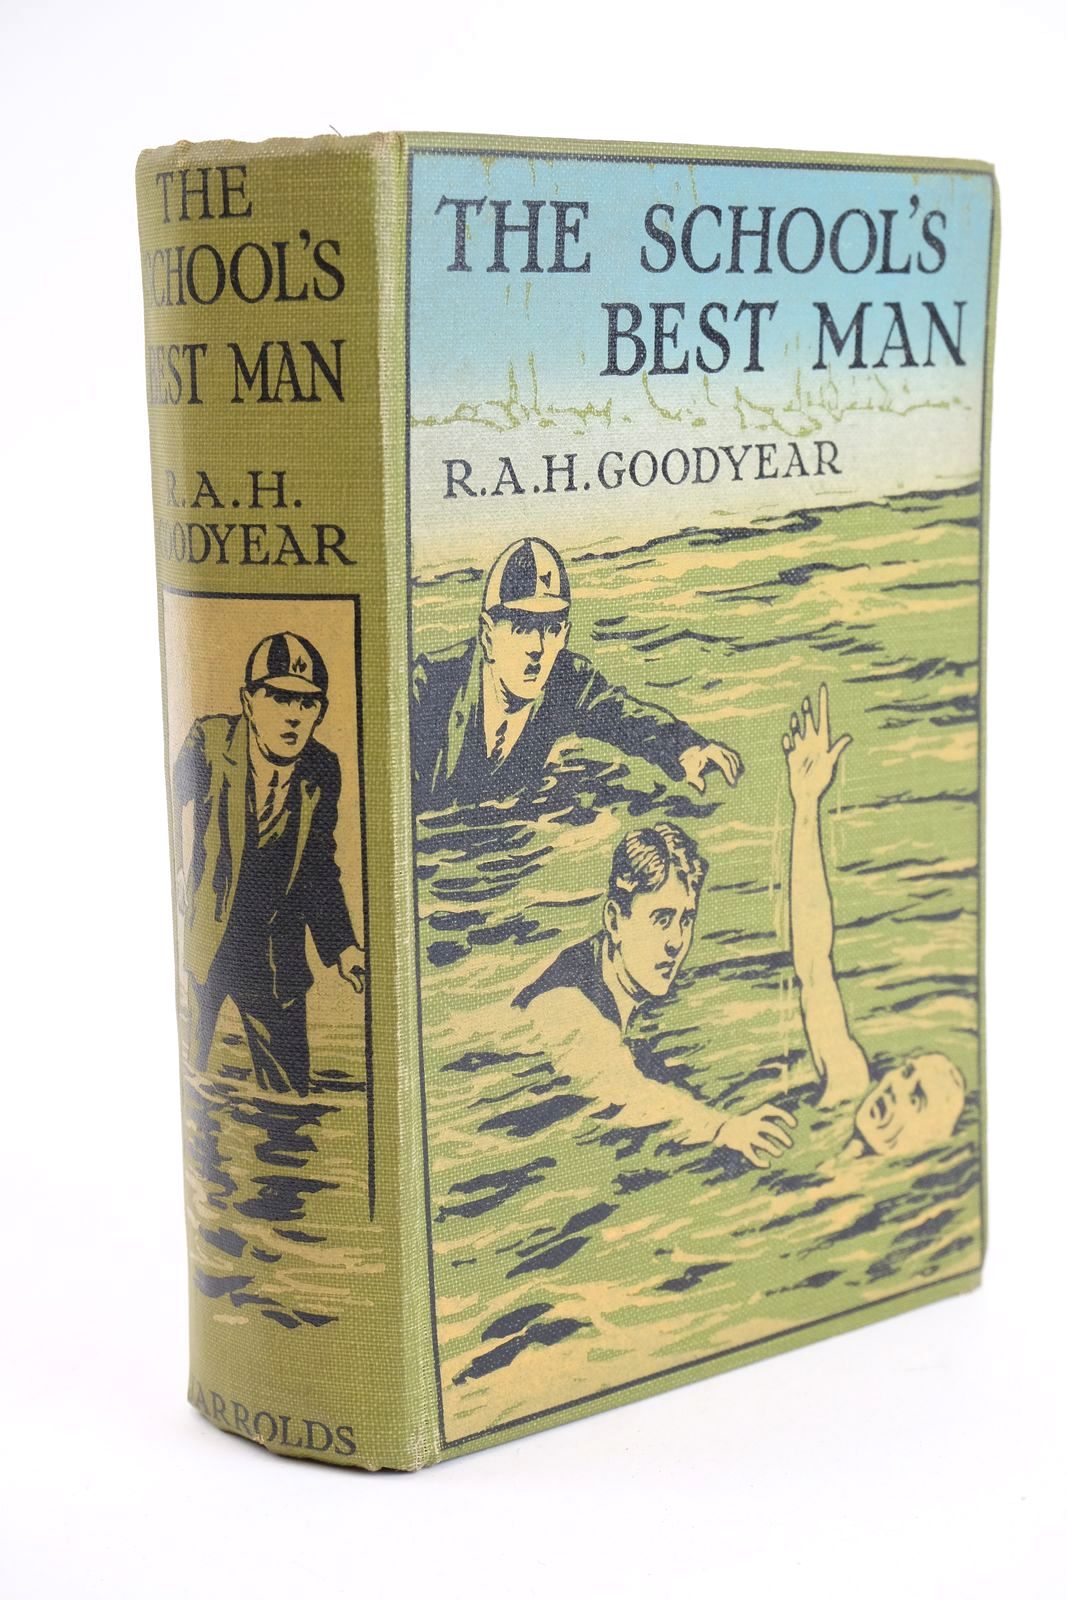 Photo of THE SCHOOL'S BEST MAN written by Goodyear, R.A.H. illustrated by Lumley, Savile published by Jarrolds Publishers (STOCK CODE: 1323804)  for sale by Stella & Rose's Books